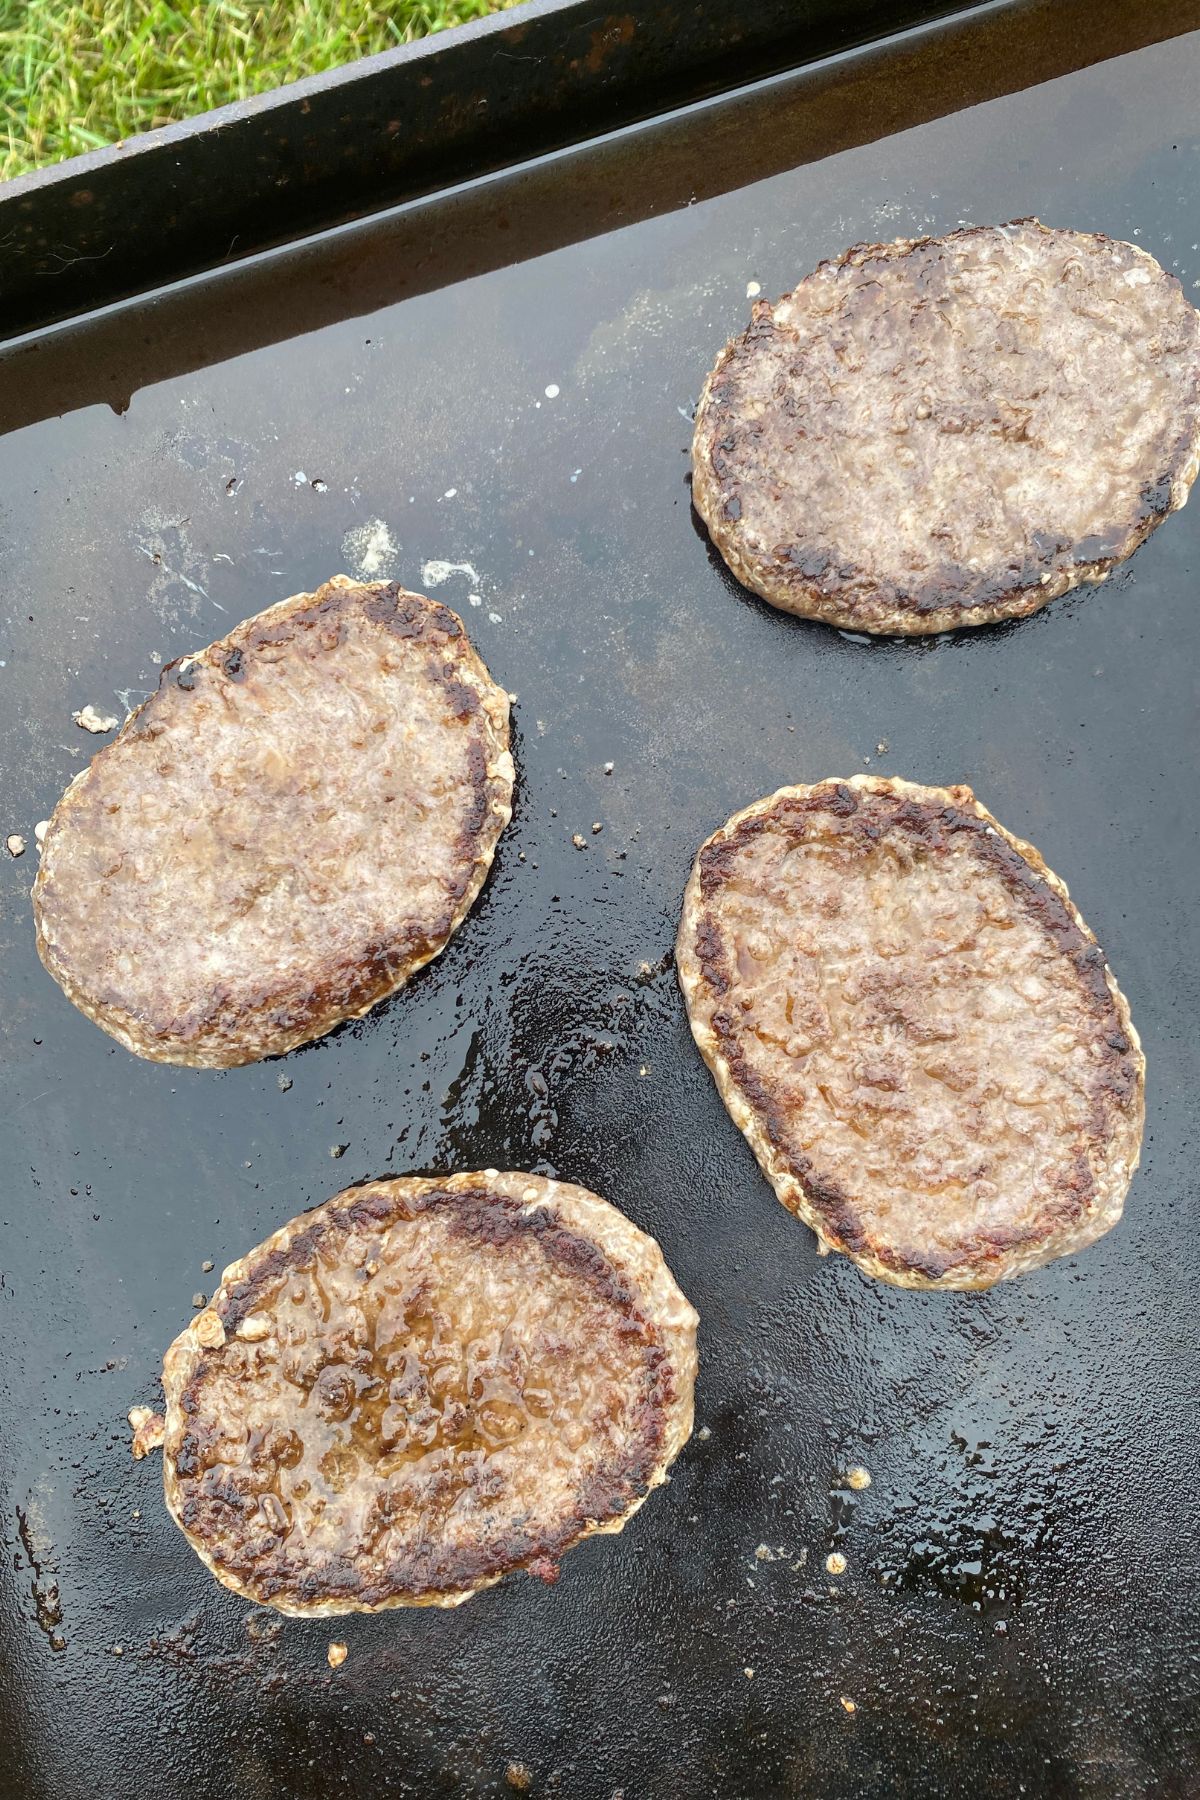 Four hamburger patties are being cooked on a grill.